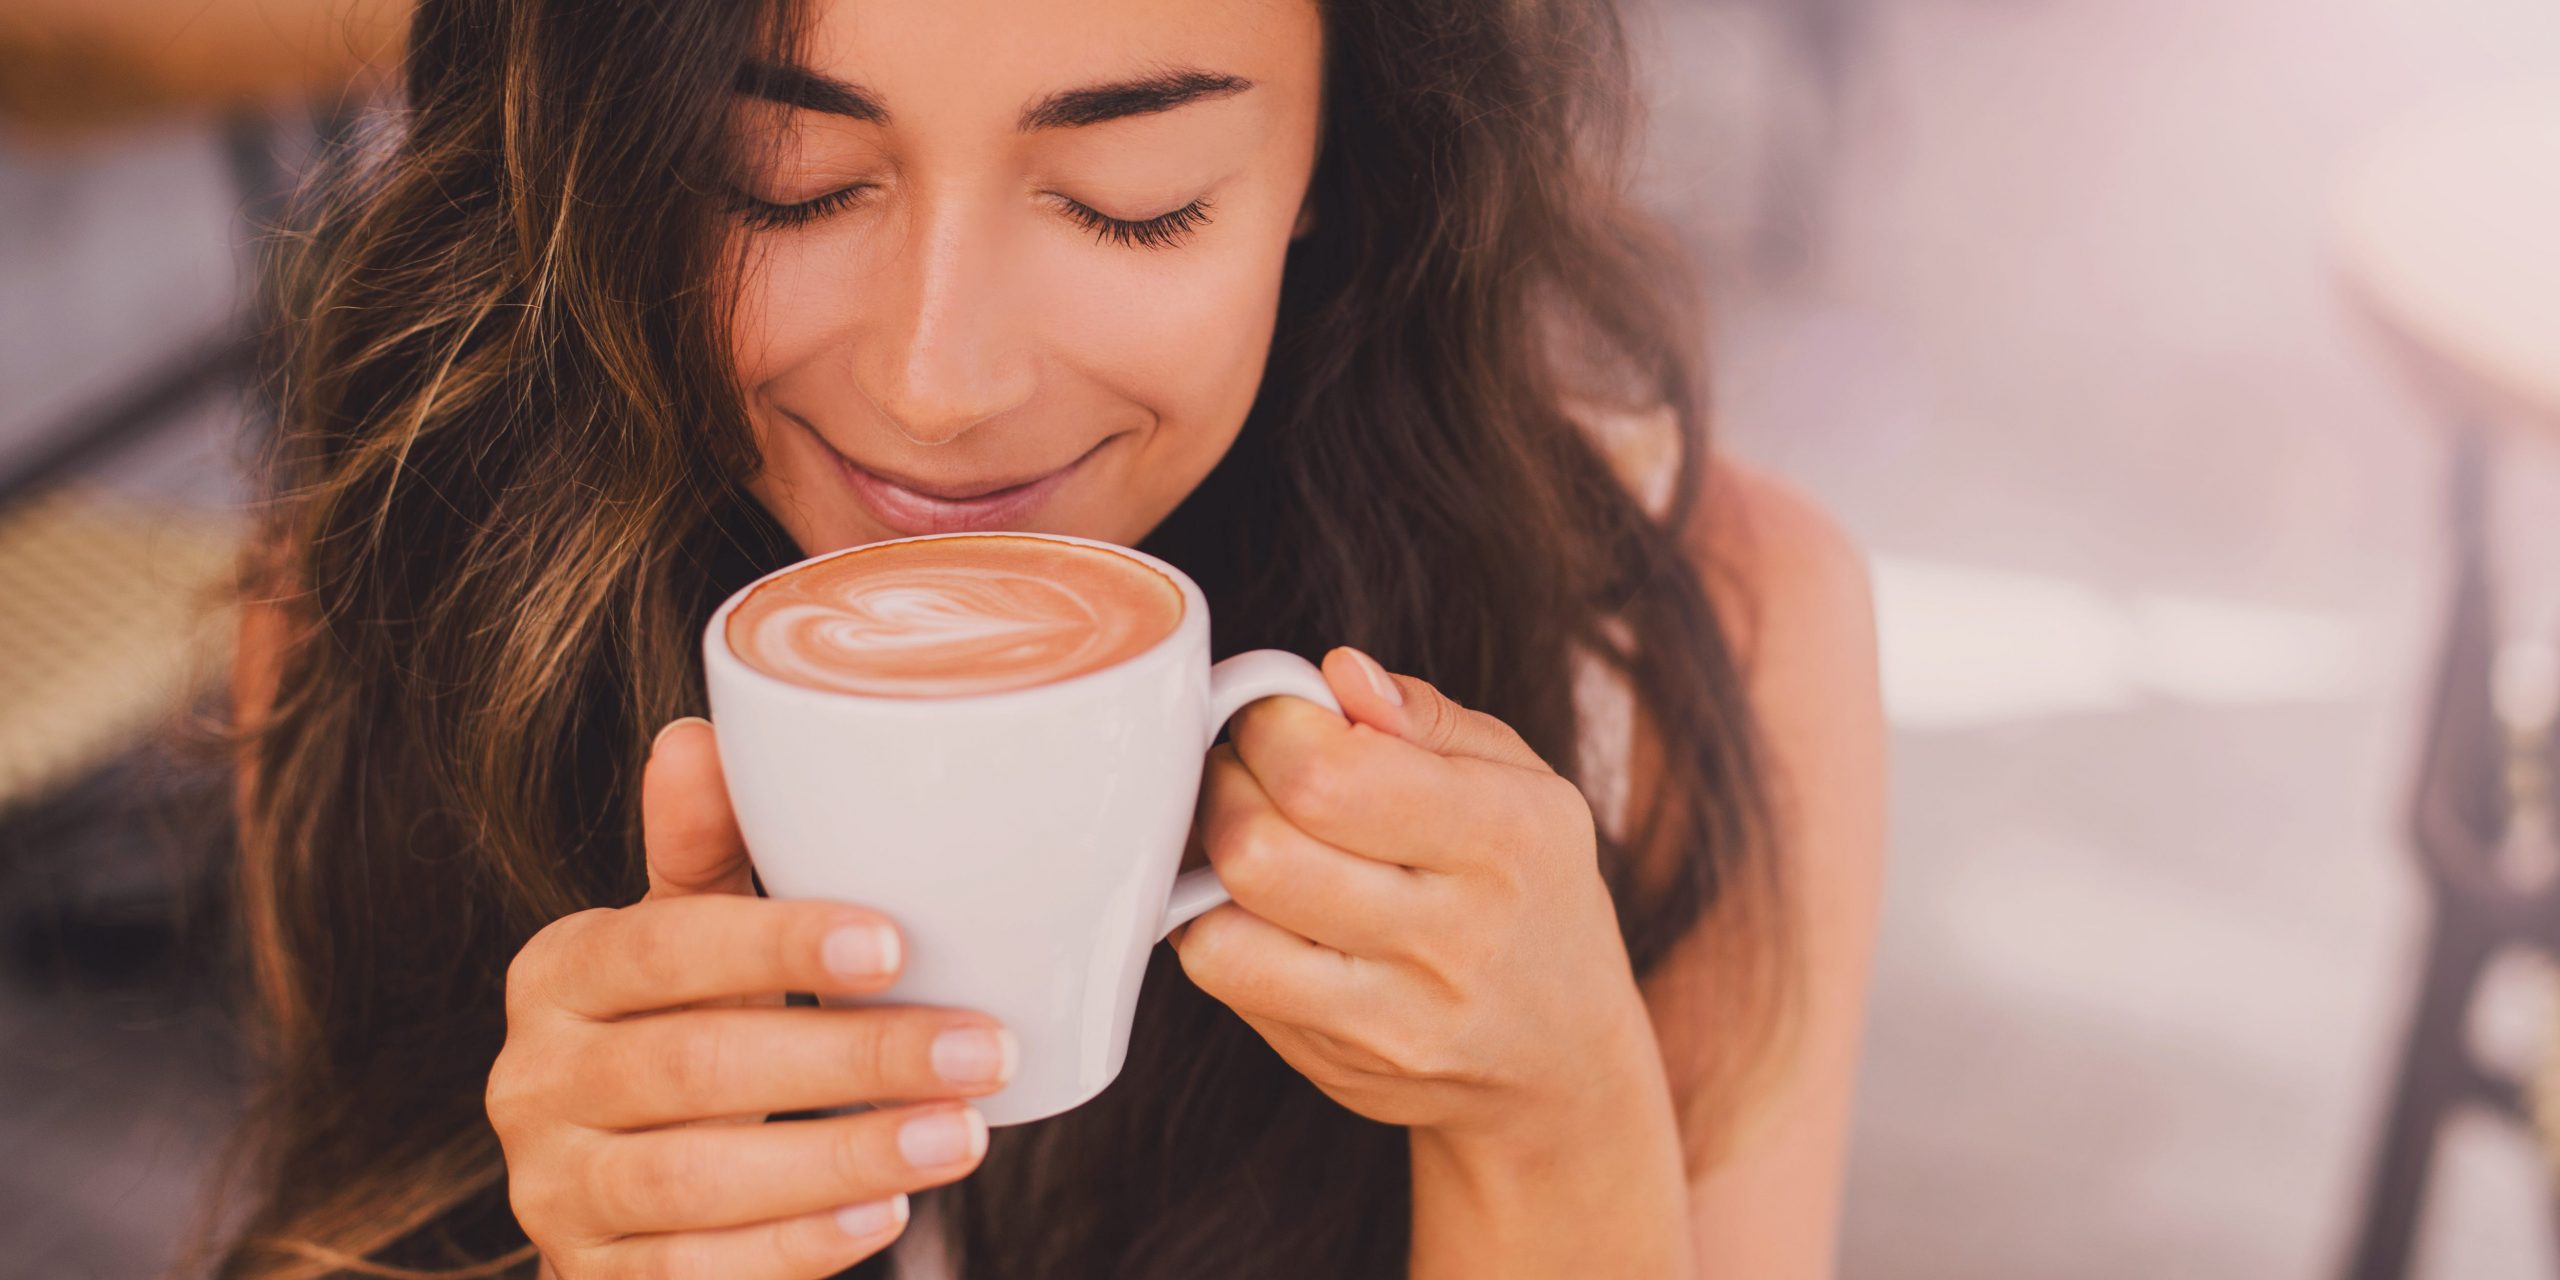 Brown haired woman drinking coffee